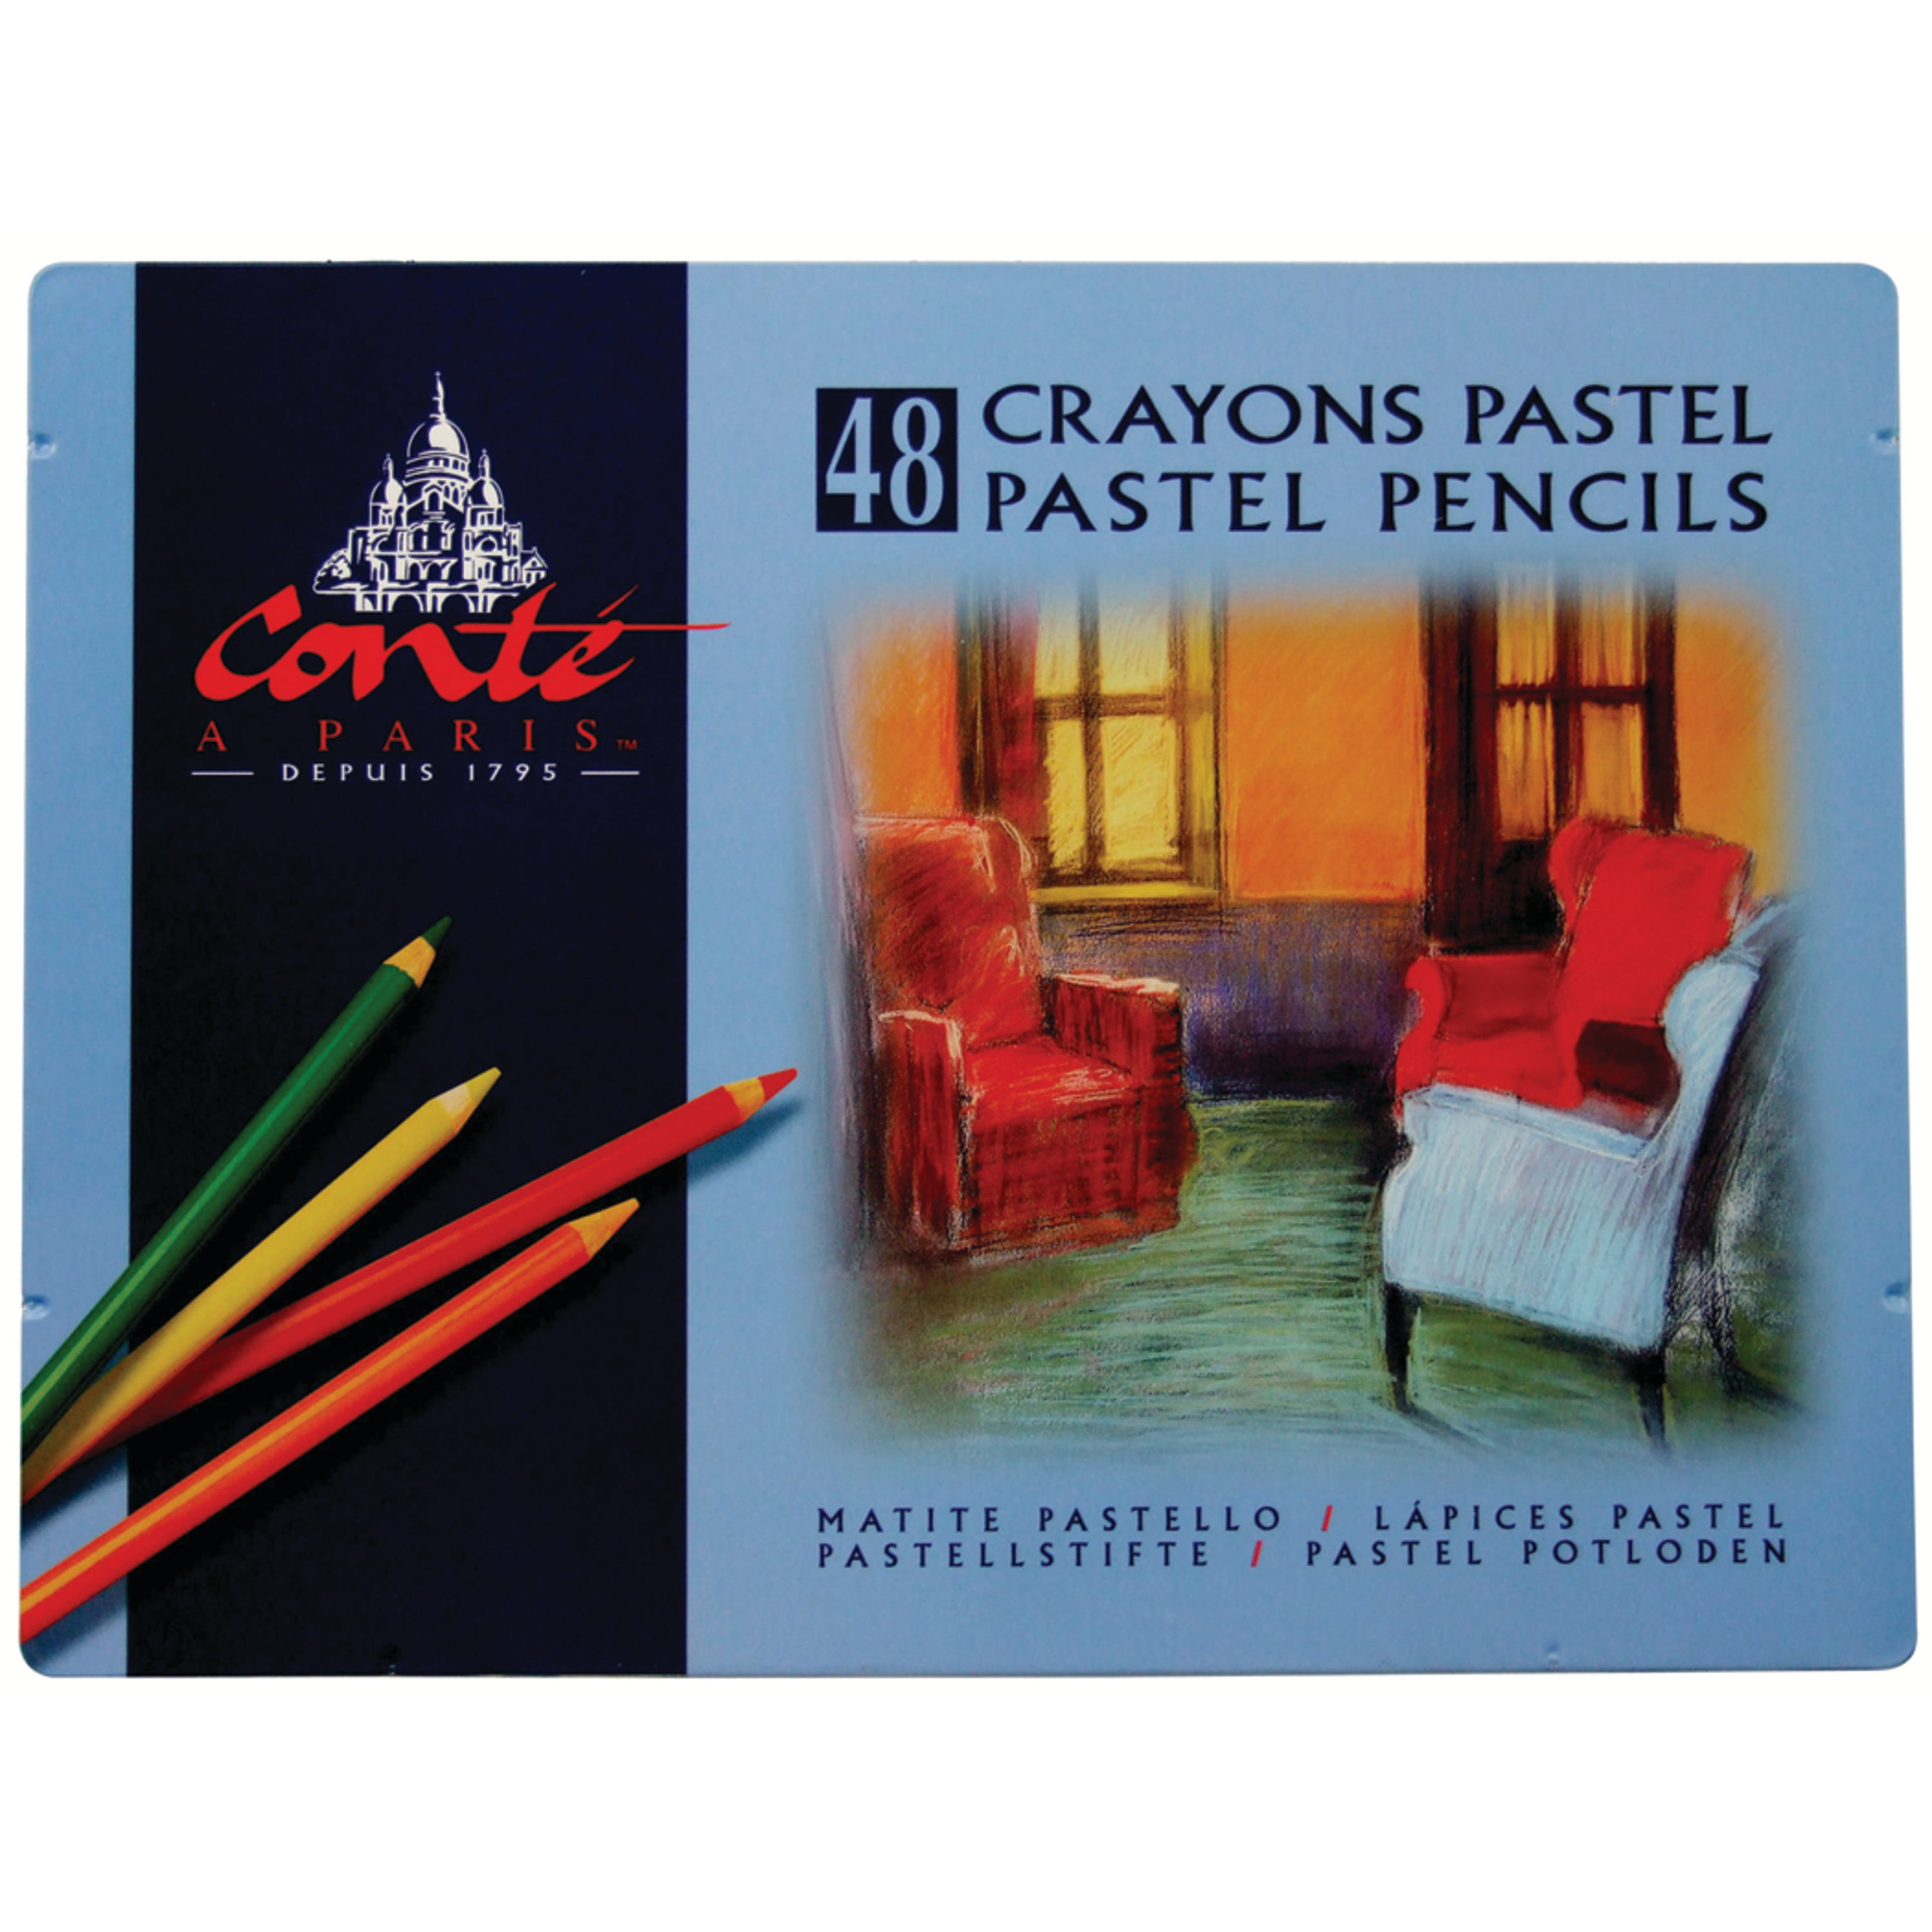 Masters Touch Pastel Colored Pencils 48 Ct Brand New Sealed